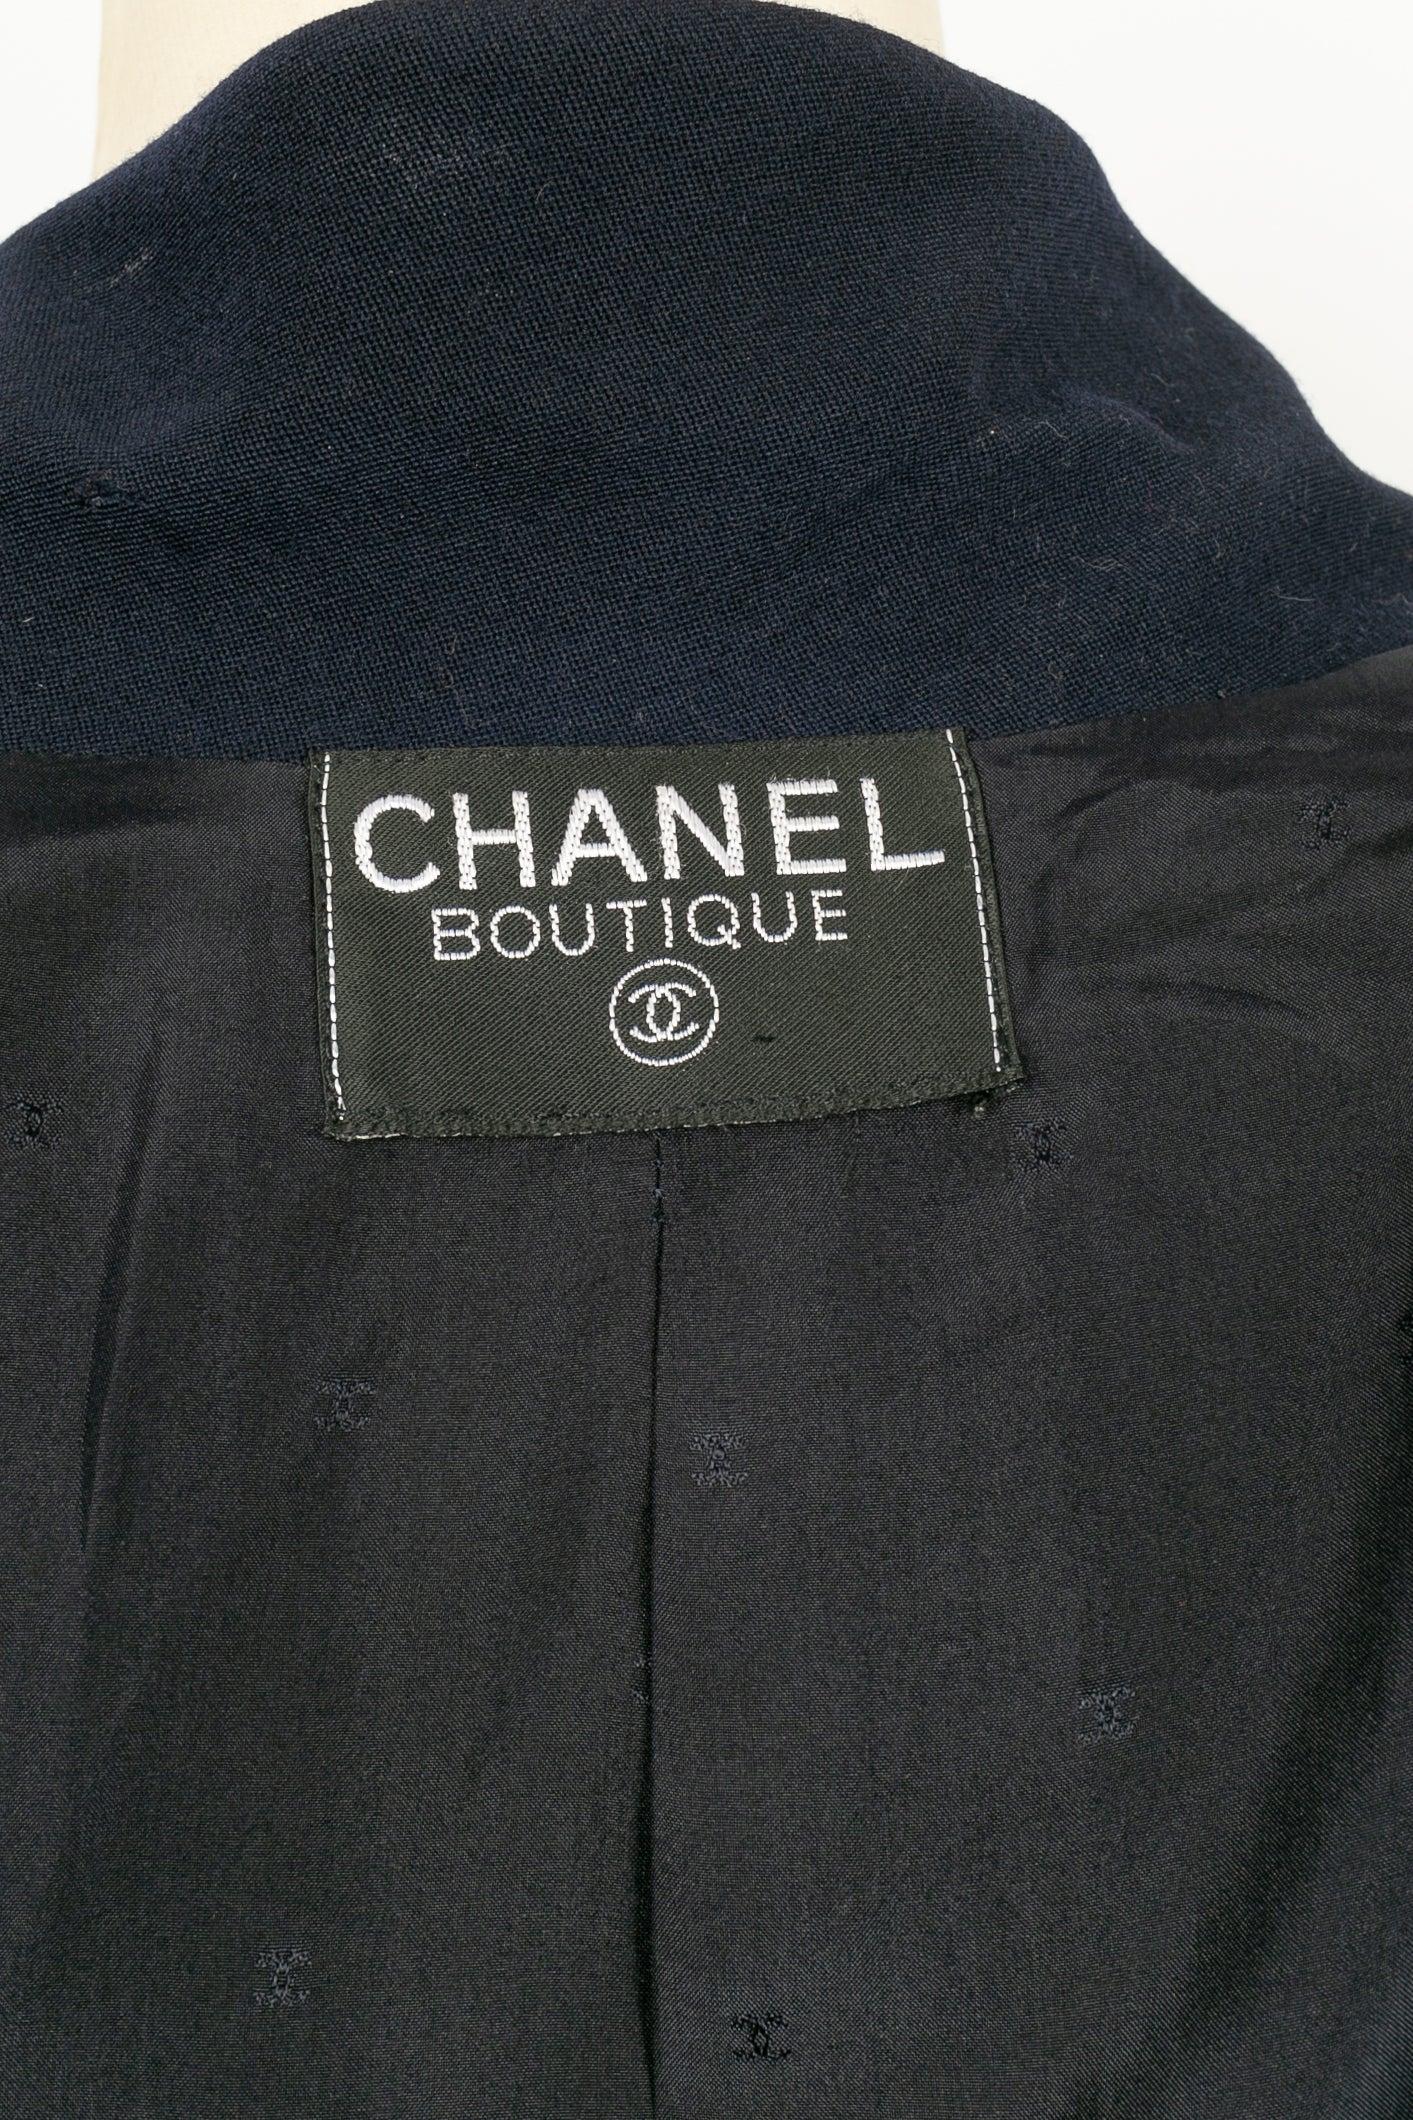 Chanel Navy Blue Wool Jacket with a Silk Lining, 1990s For Sale 5